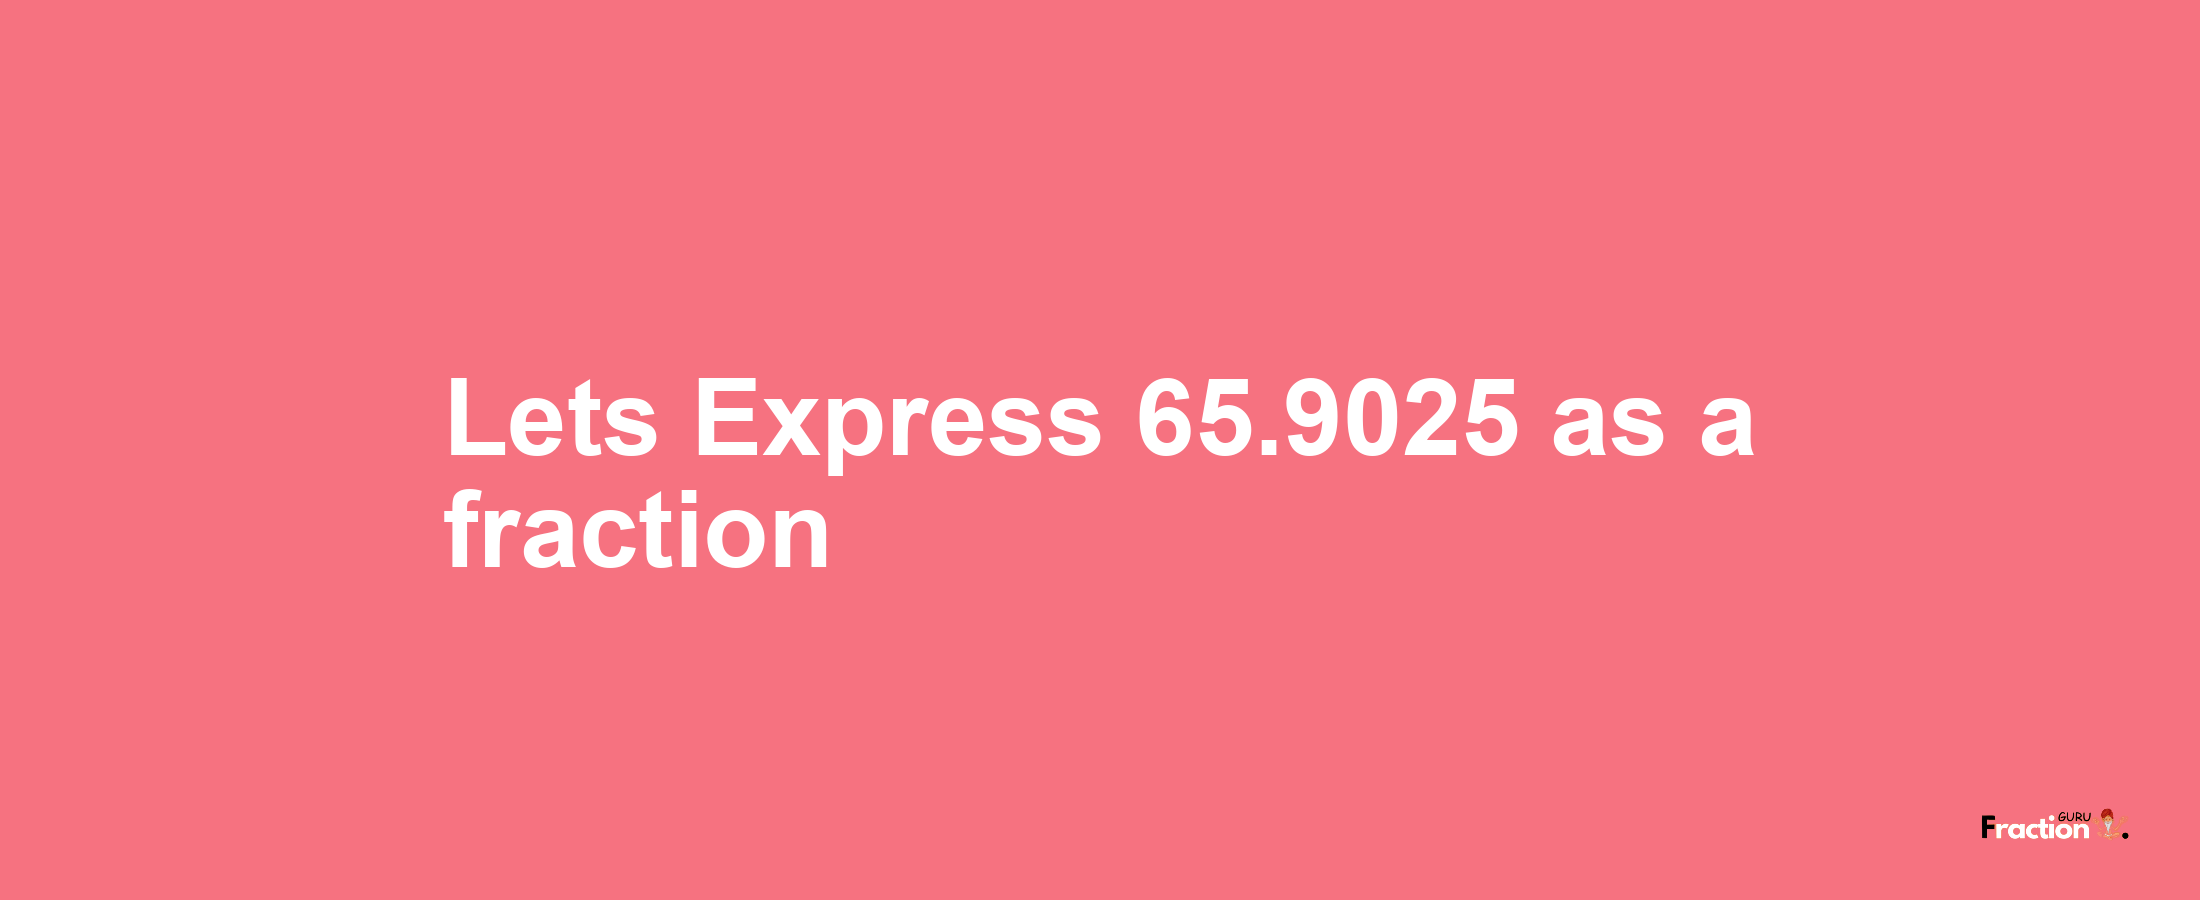 Lets Express 65.9025 as afraction